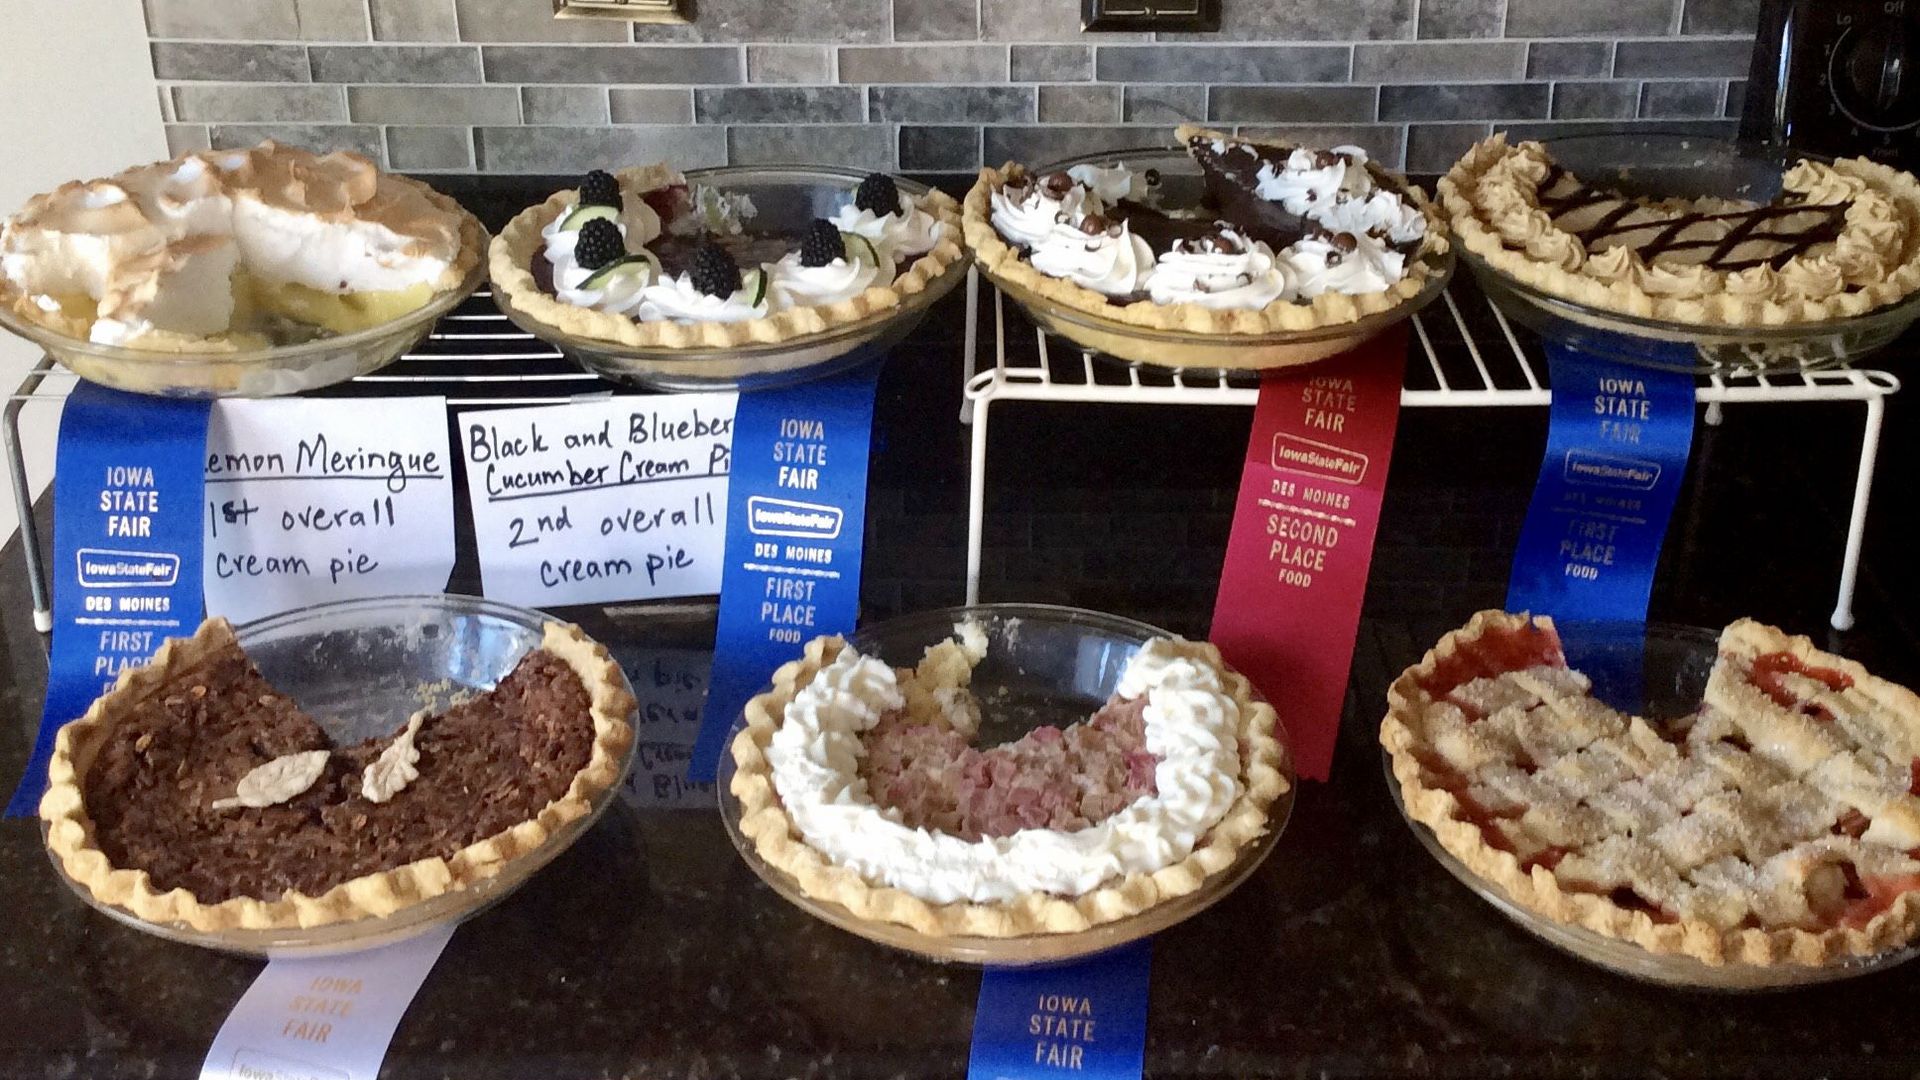 Marcia Miller, Jason's neighbor, shared samples of each of these with him. But she wouldn't give up her recipe for black and blueberry cucumber cream pie. (It was delicious.) Photo courtesy of Miller